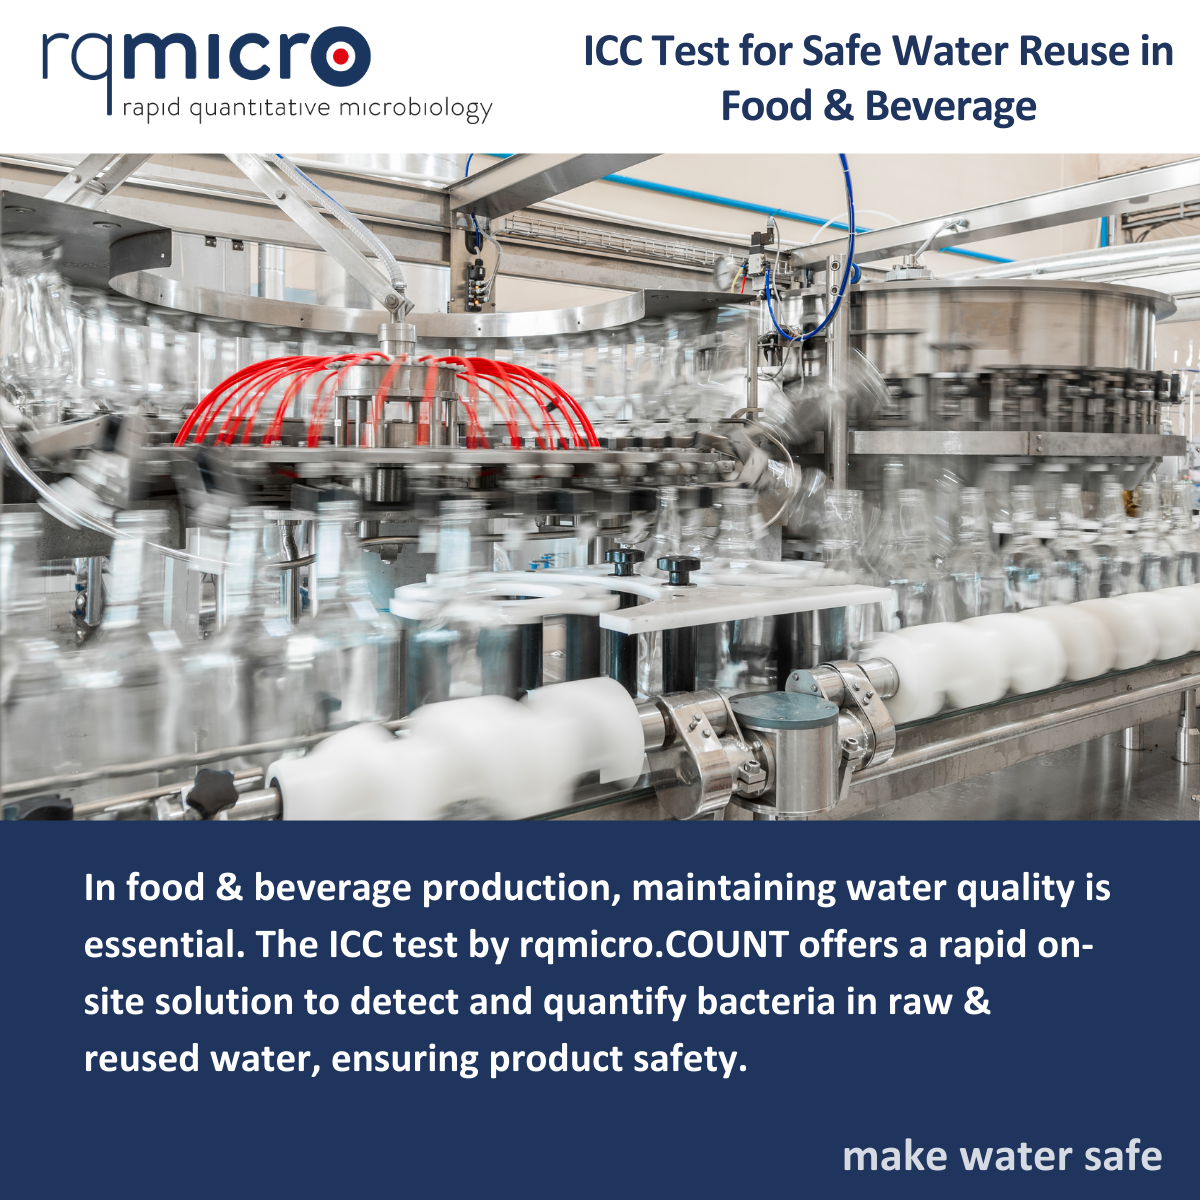 Intact Cell Count (ICC) Test for Safe Water Reuse in Food & Beverage